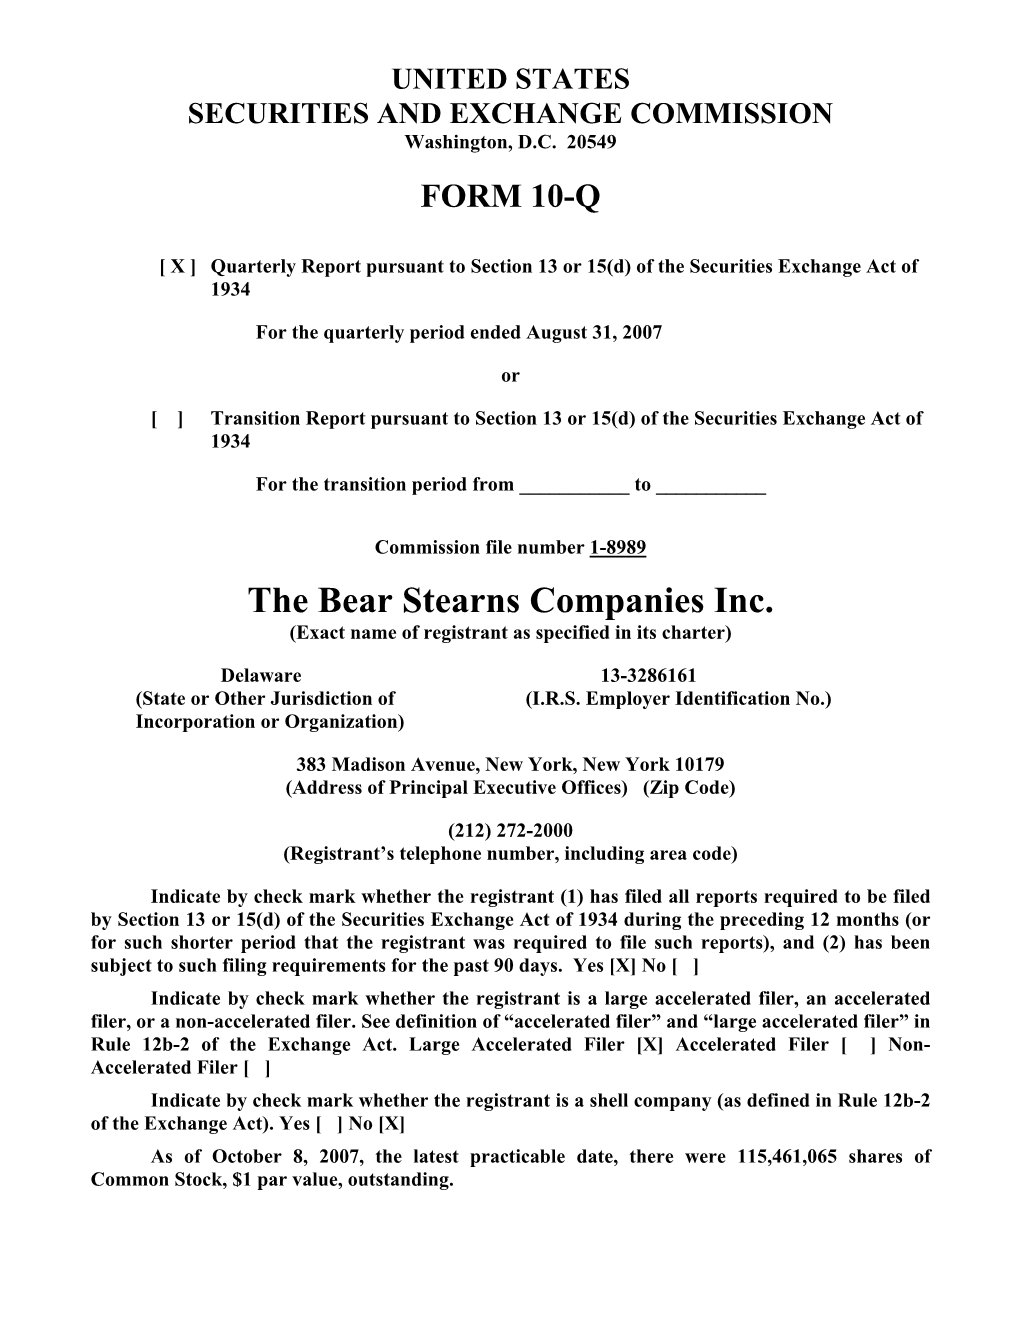 The Bear Stearns Companies Inc. (Exact Name of Registrant As Specified in Its Charter)